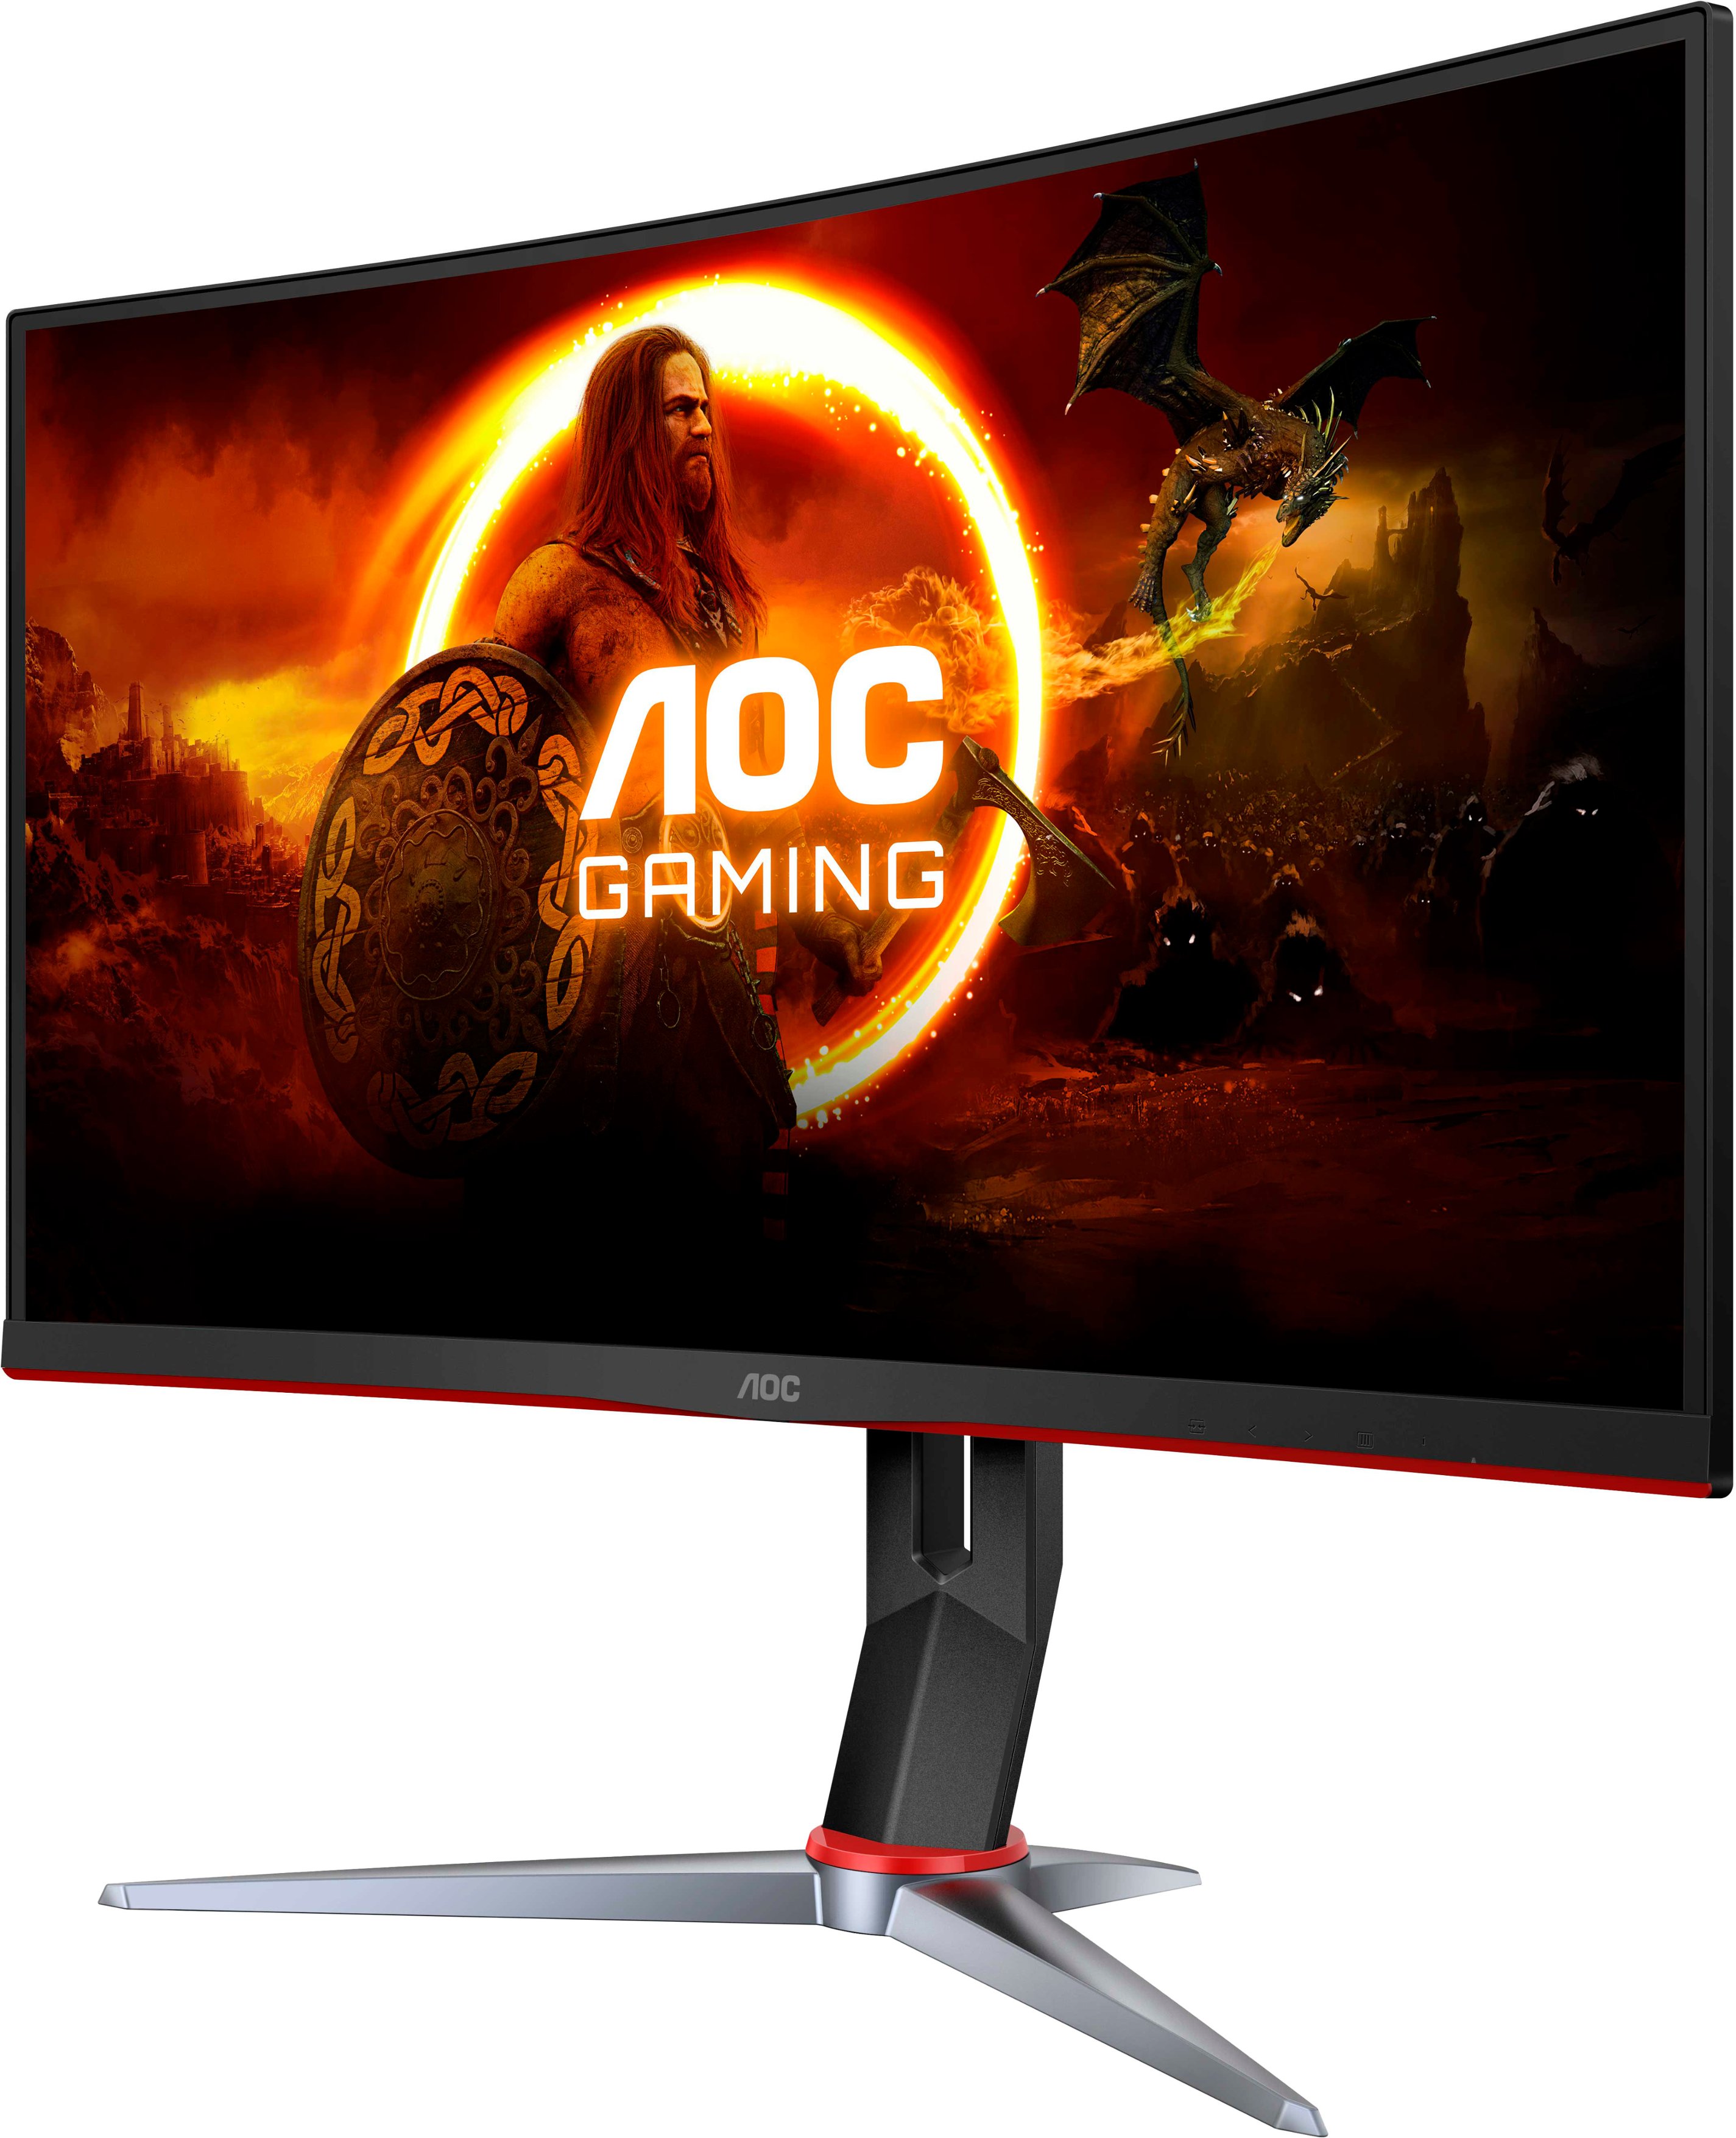 Left View: AOC - G2 Series C32G2 32" LCD Curved FHD FreeSync Gaming Monitor - Black/Red